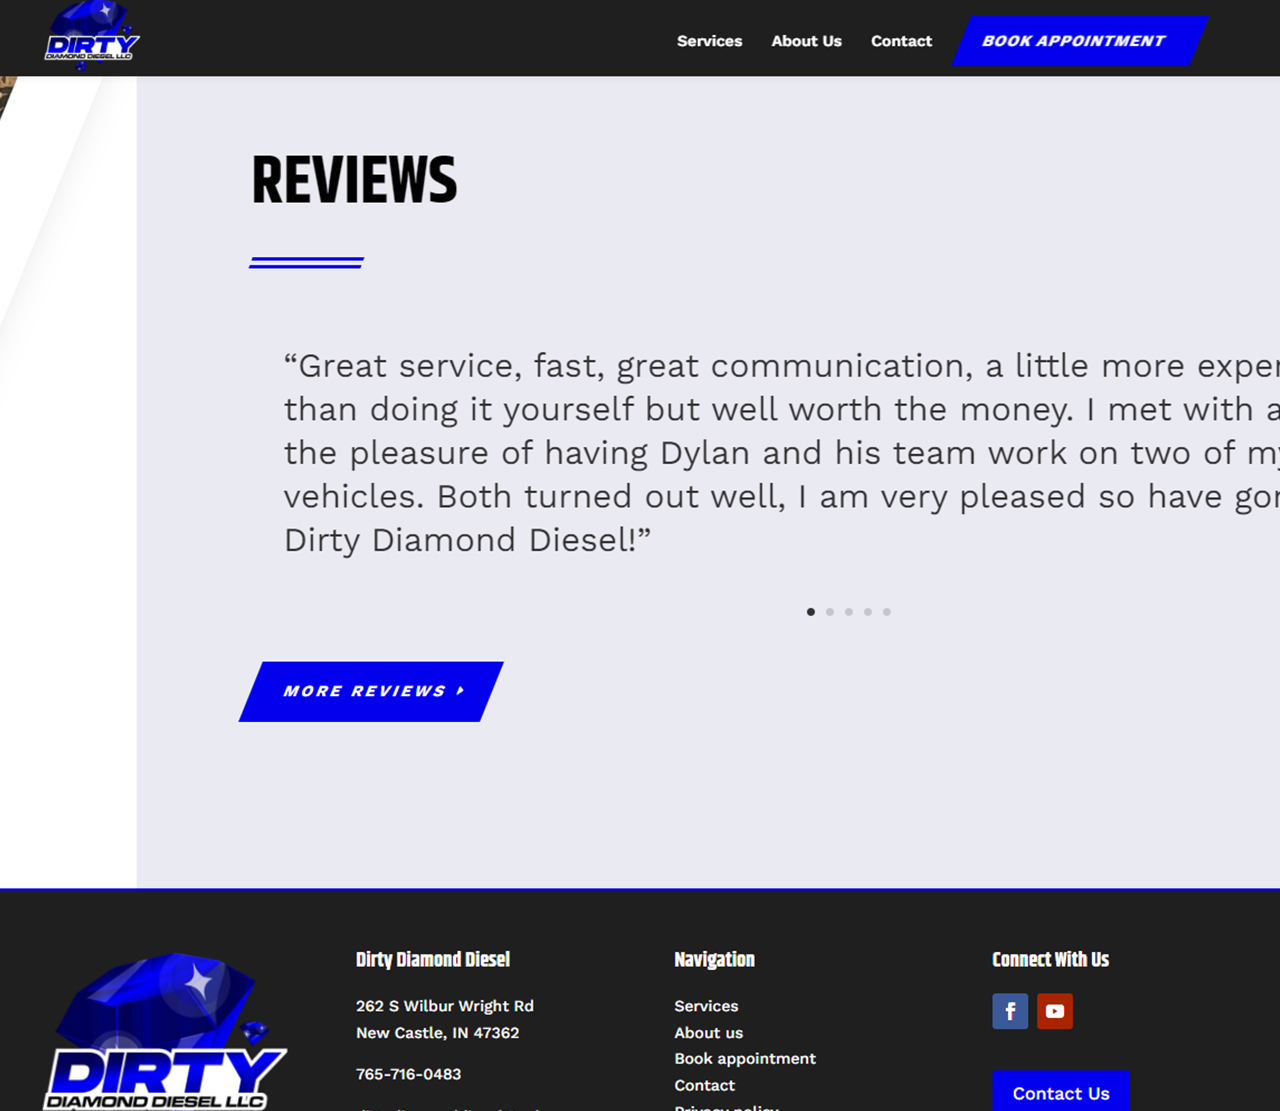 Dirty Diamond Diesel Reviews Section